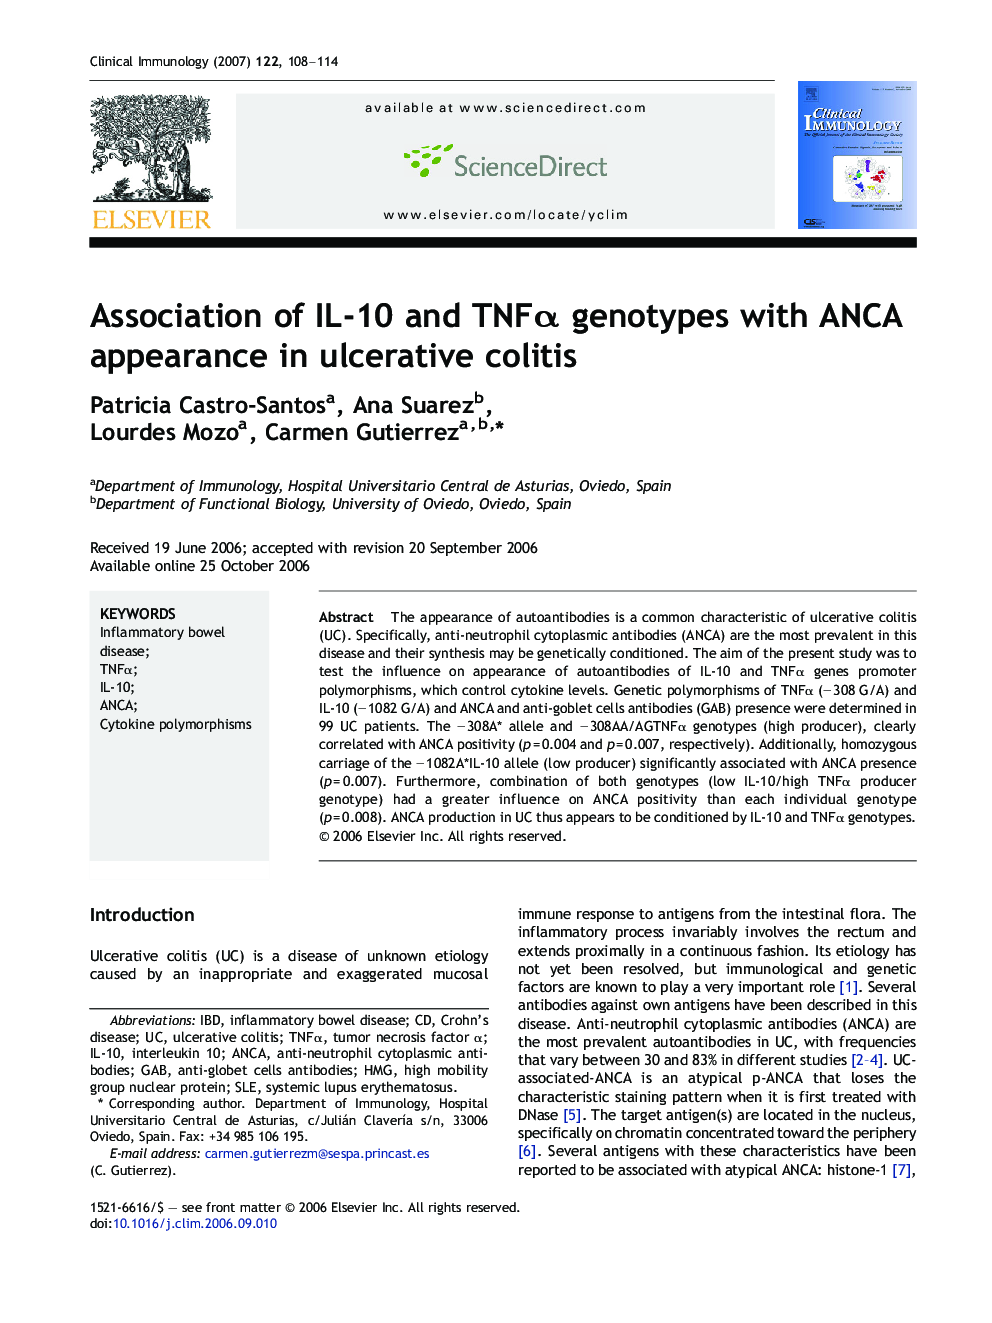 Association of IL-10 and TNFα genotypes with ANCA appearance in ulcerative colitis